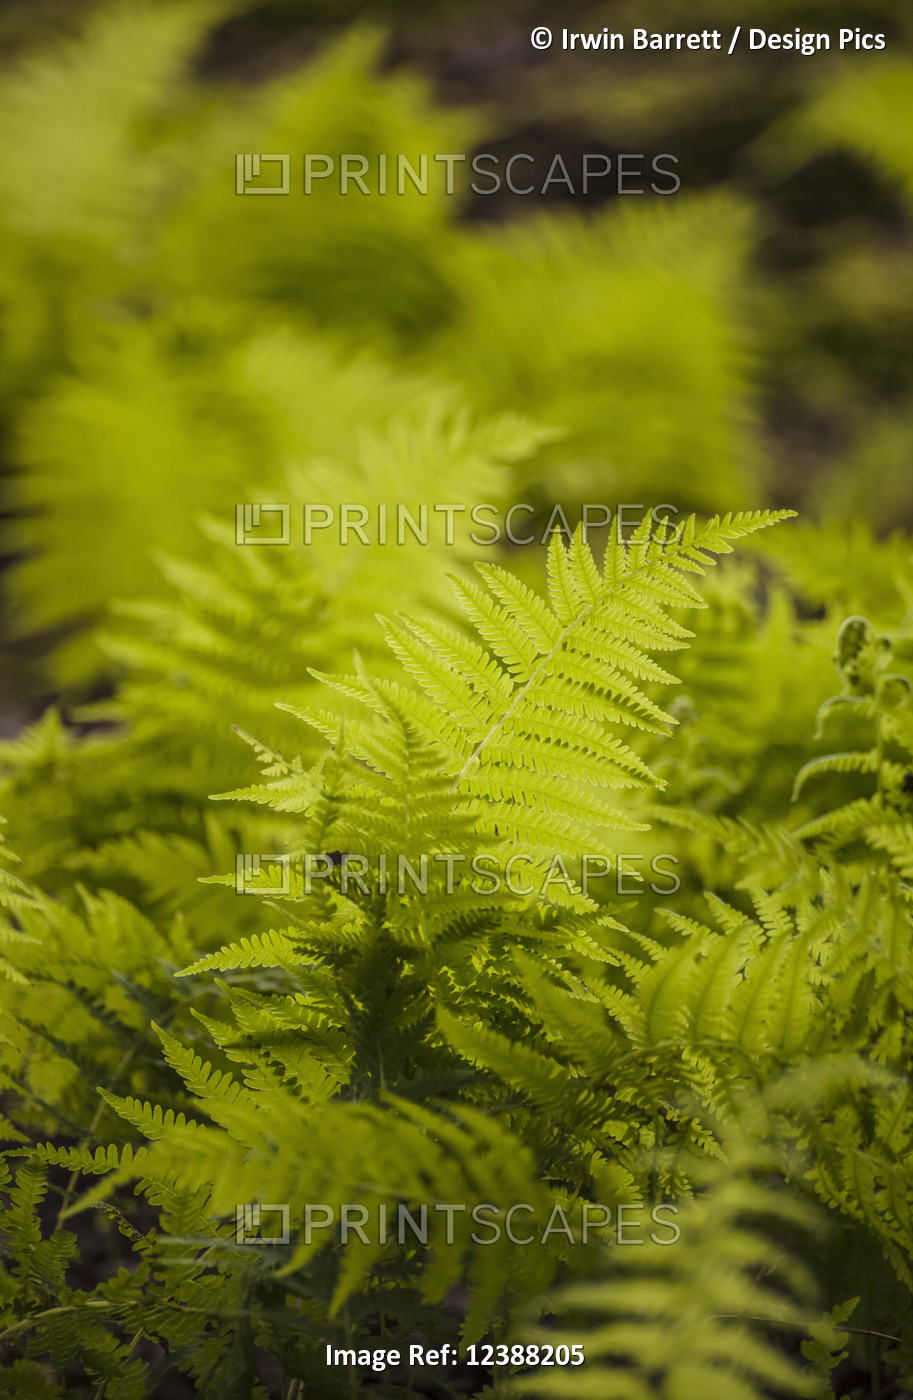 A lone New York fern (Thelypteris noveboracensis) stands out from among the ...